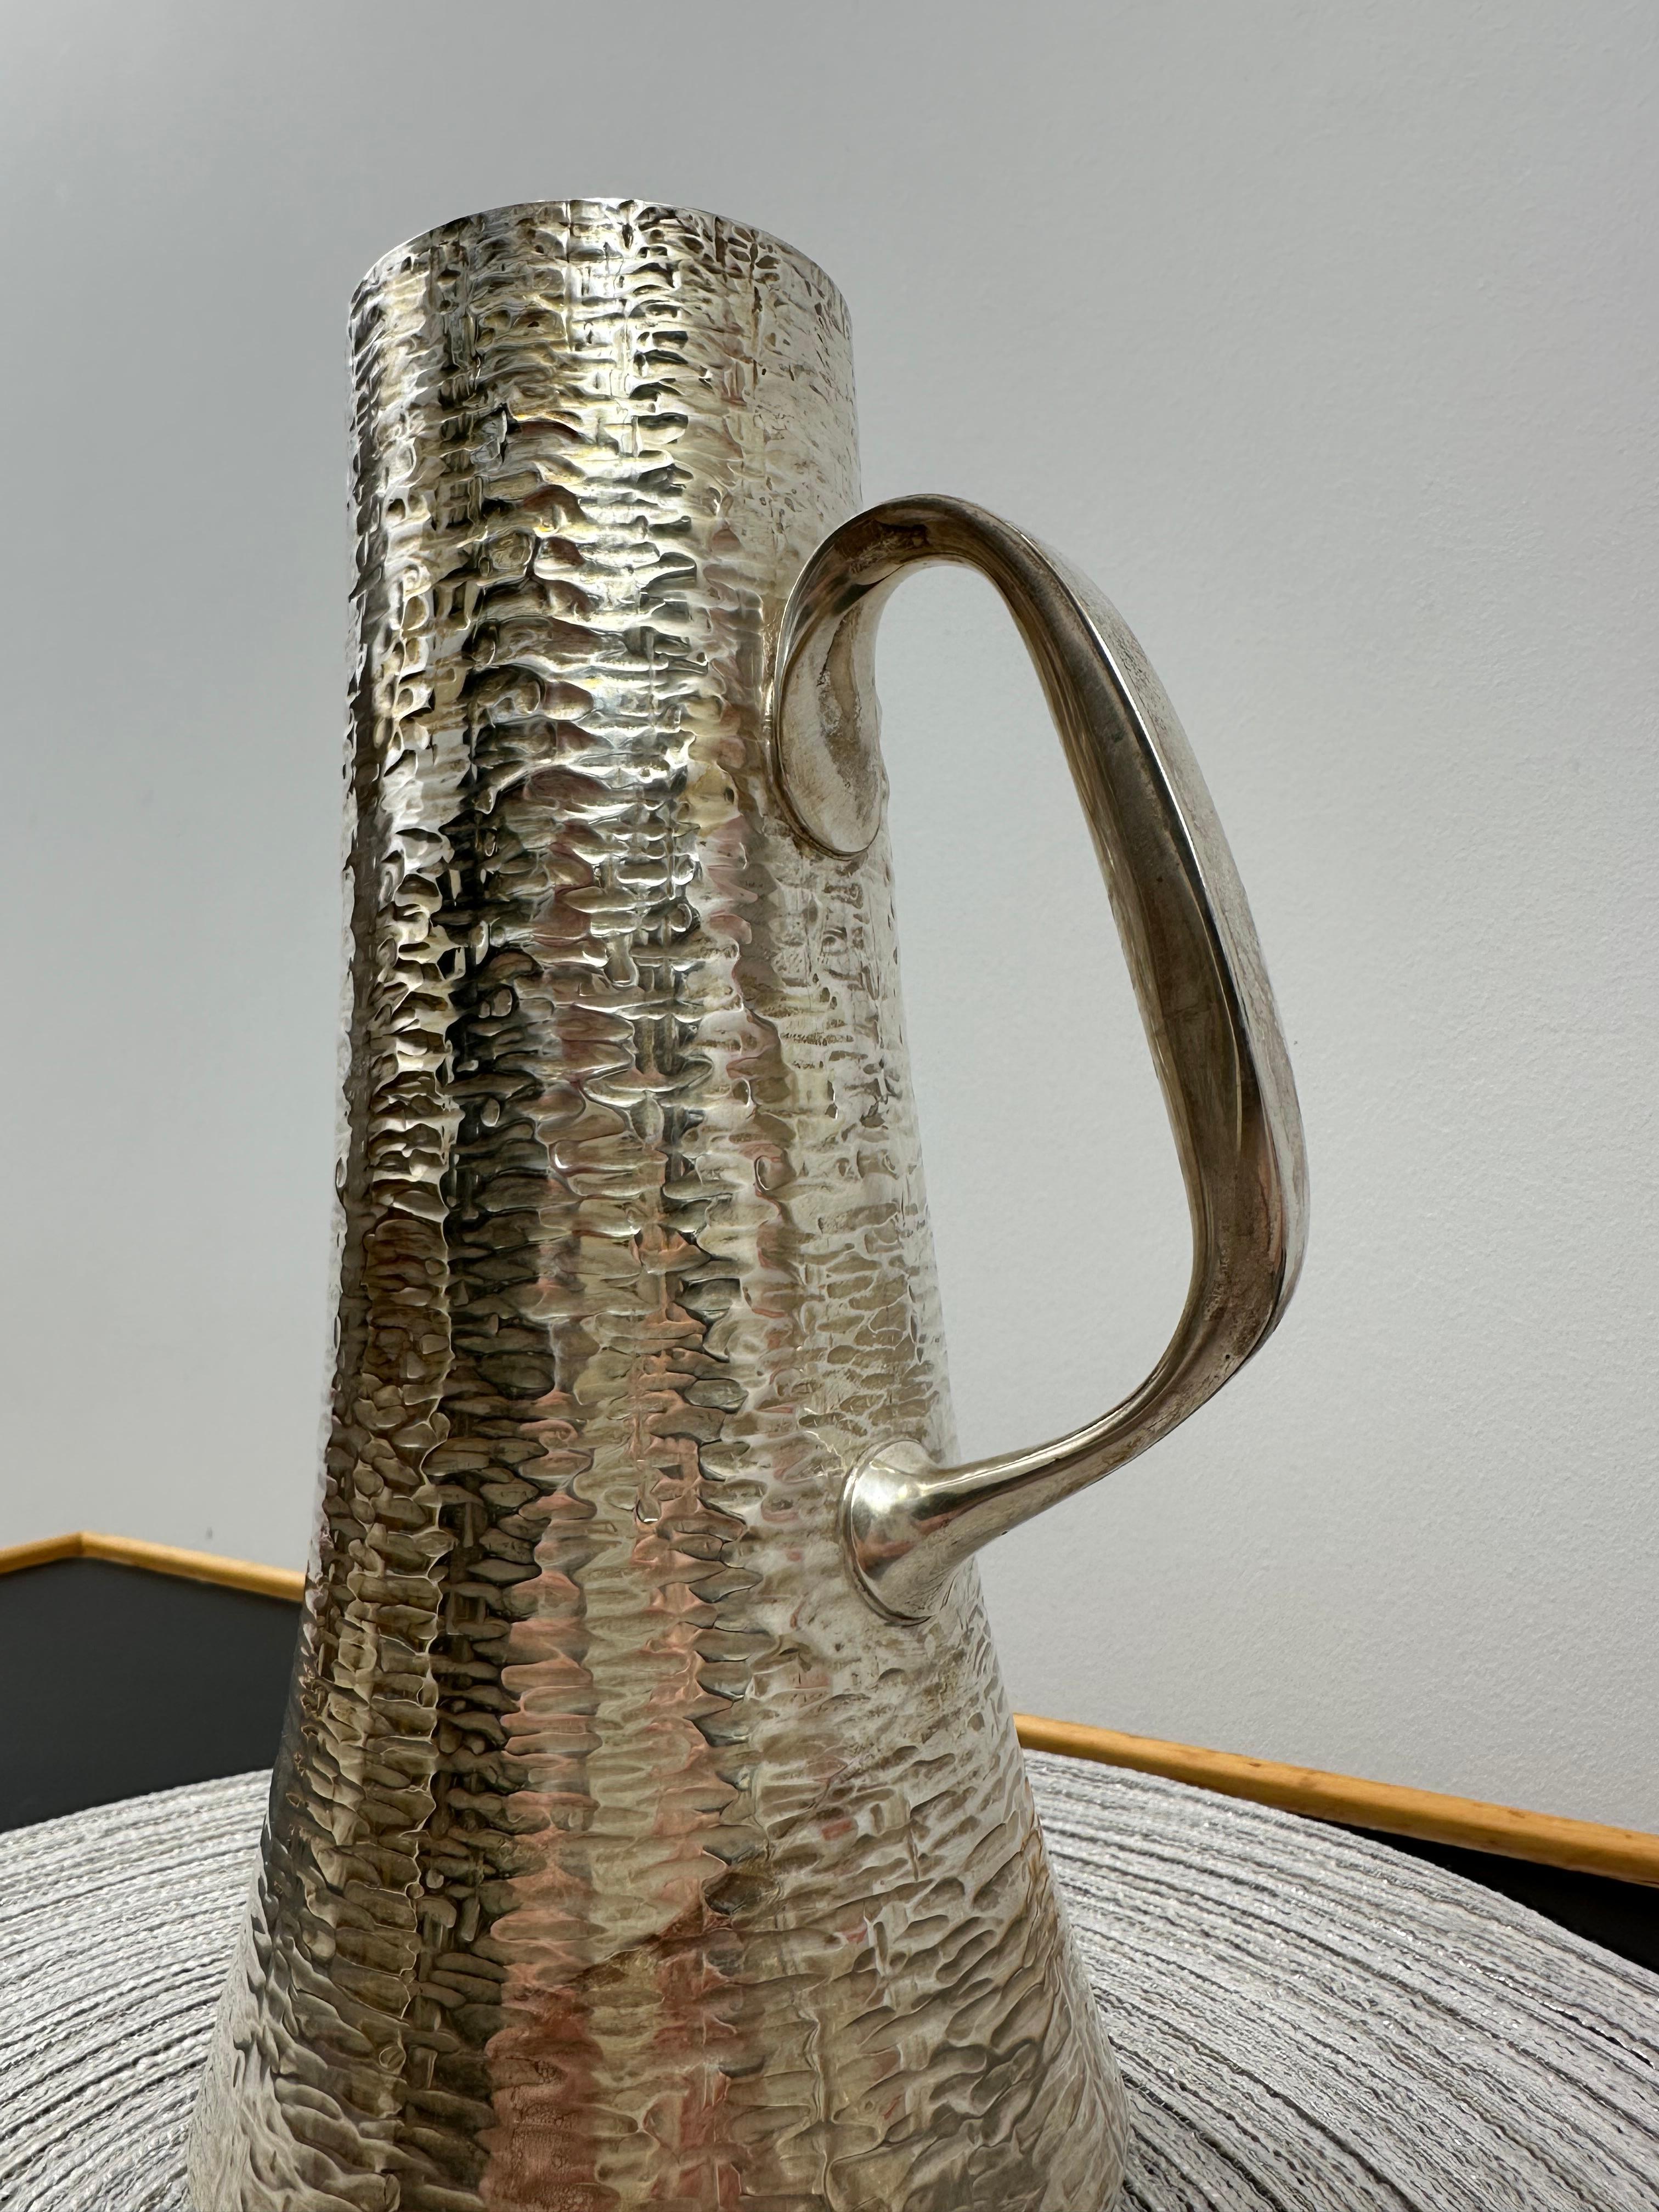 Tapio Wirkkala Set of Sterling Silver Hand Hammered Cups and a Pitcher In Good Condition For Sale In Espoo, FI